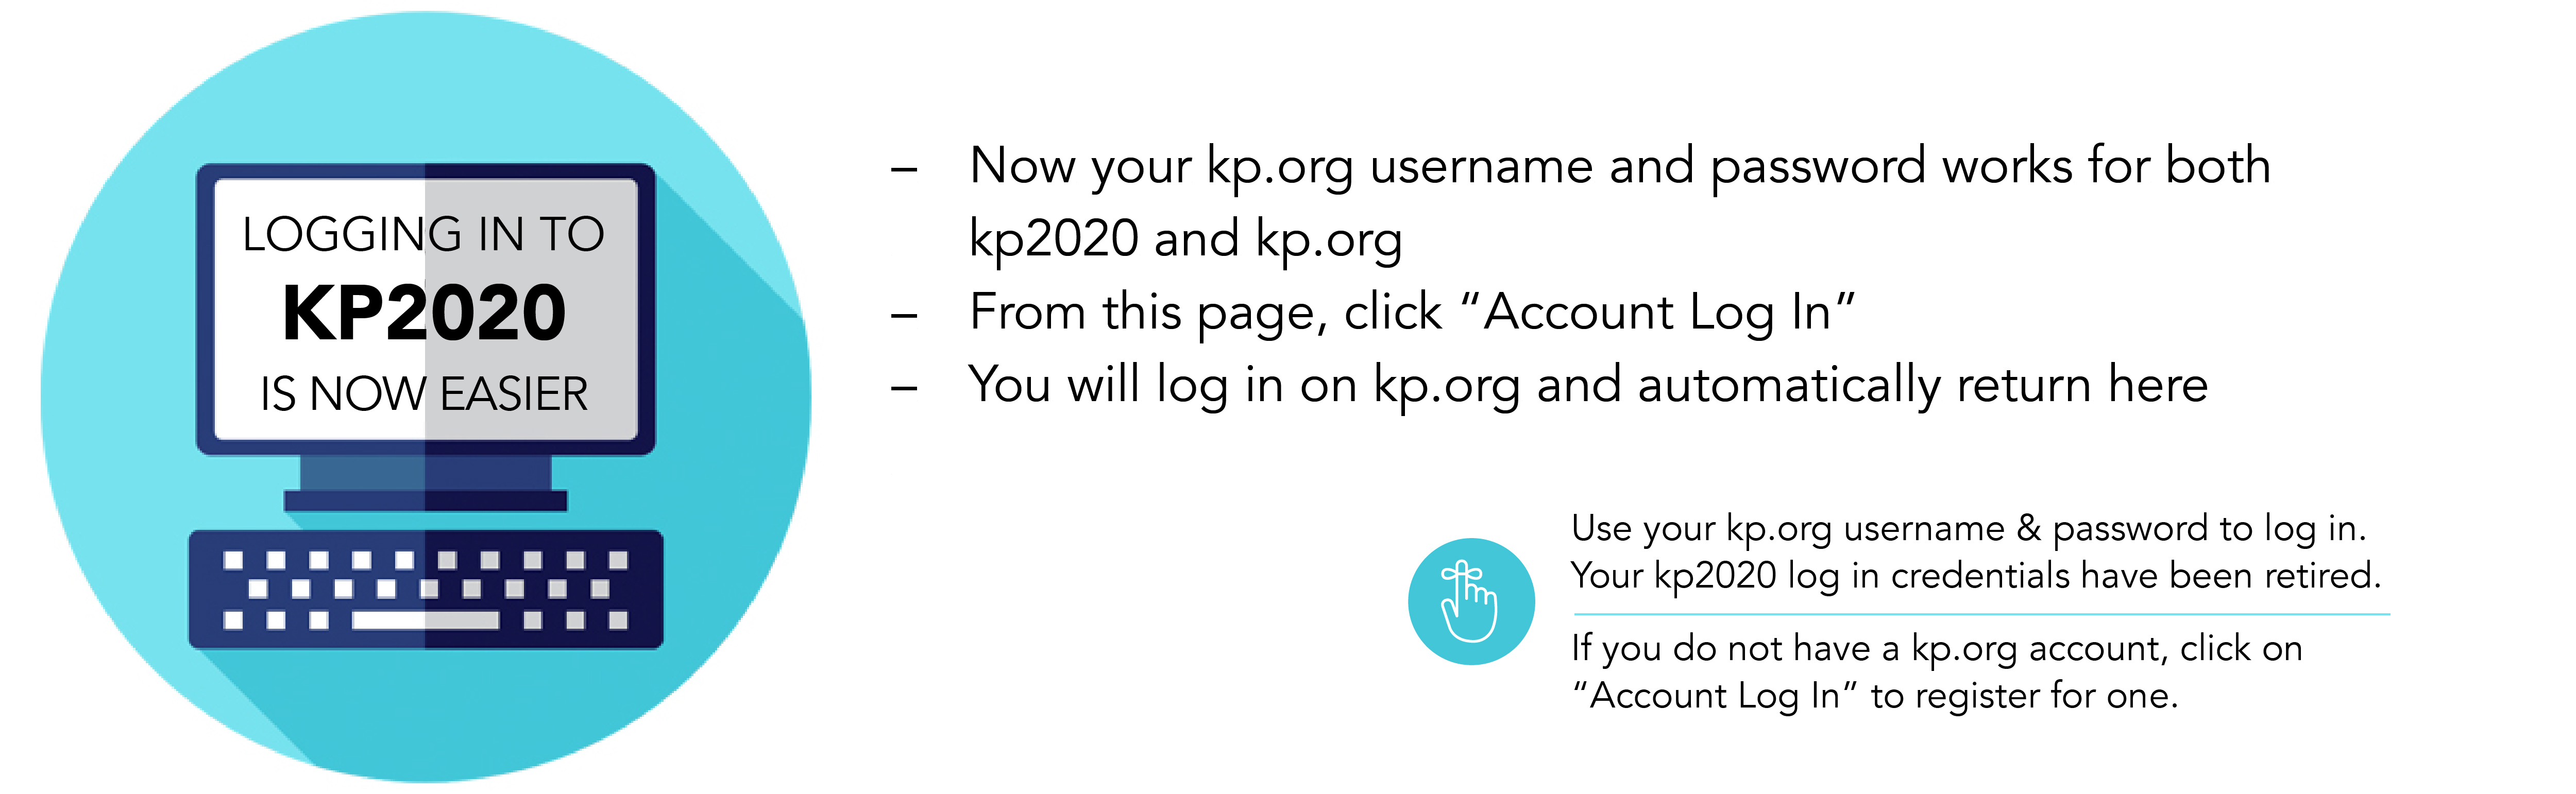 User your KP.org login for KP2020